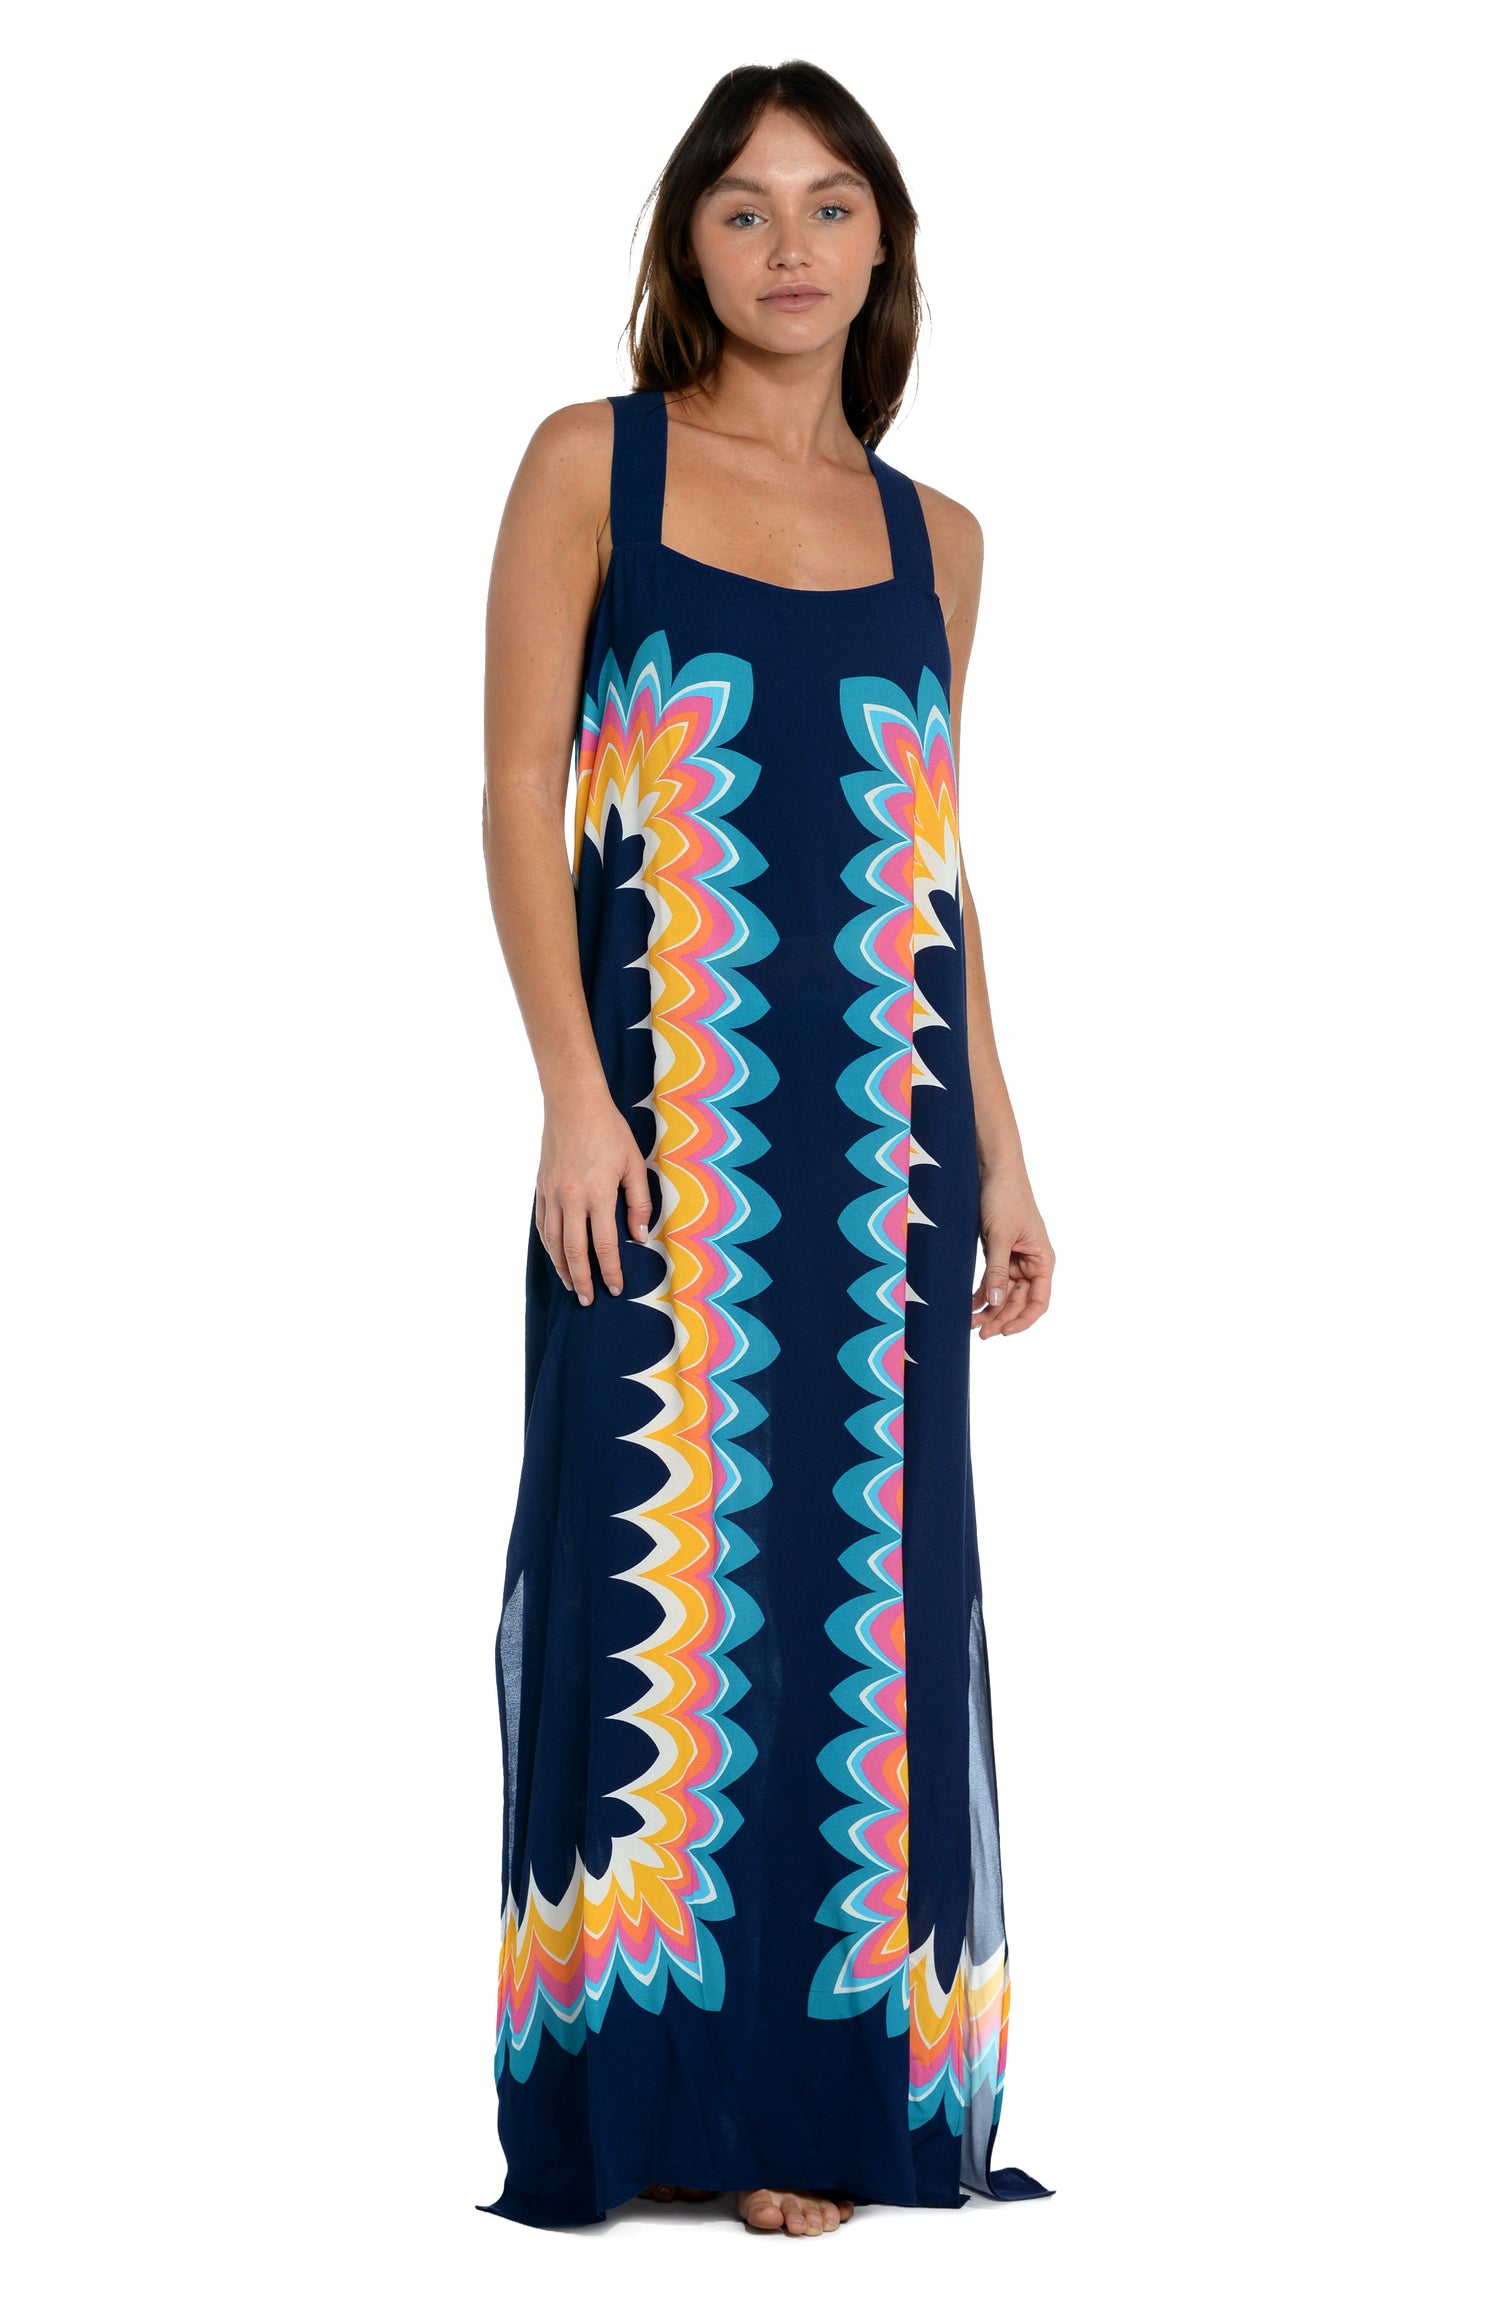 Model is wearing a navy multicolored geometric printed maxi dress cover up from our New Wave collection.